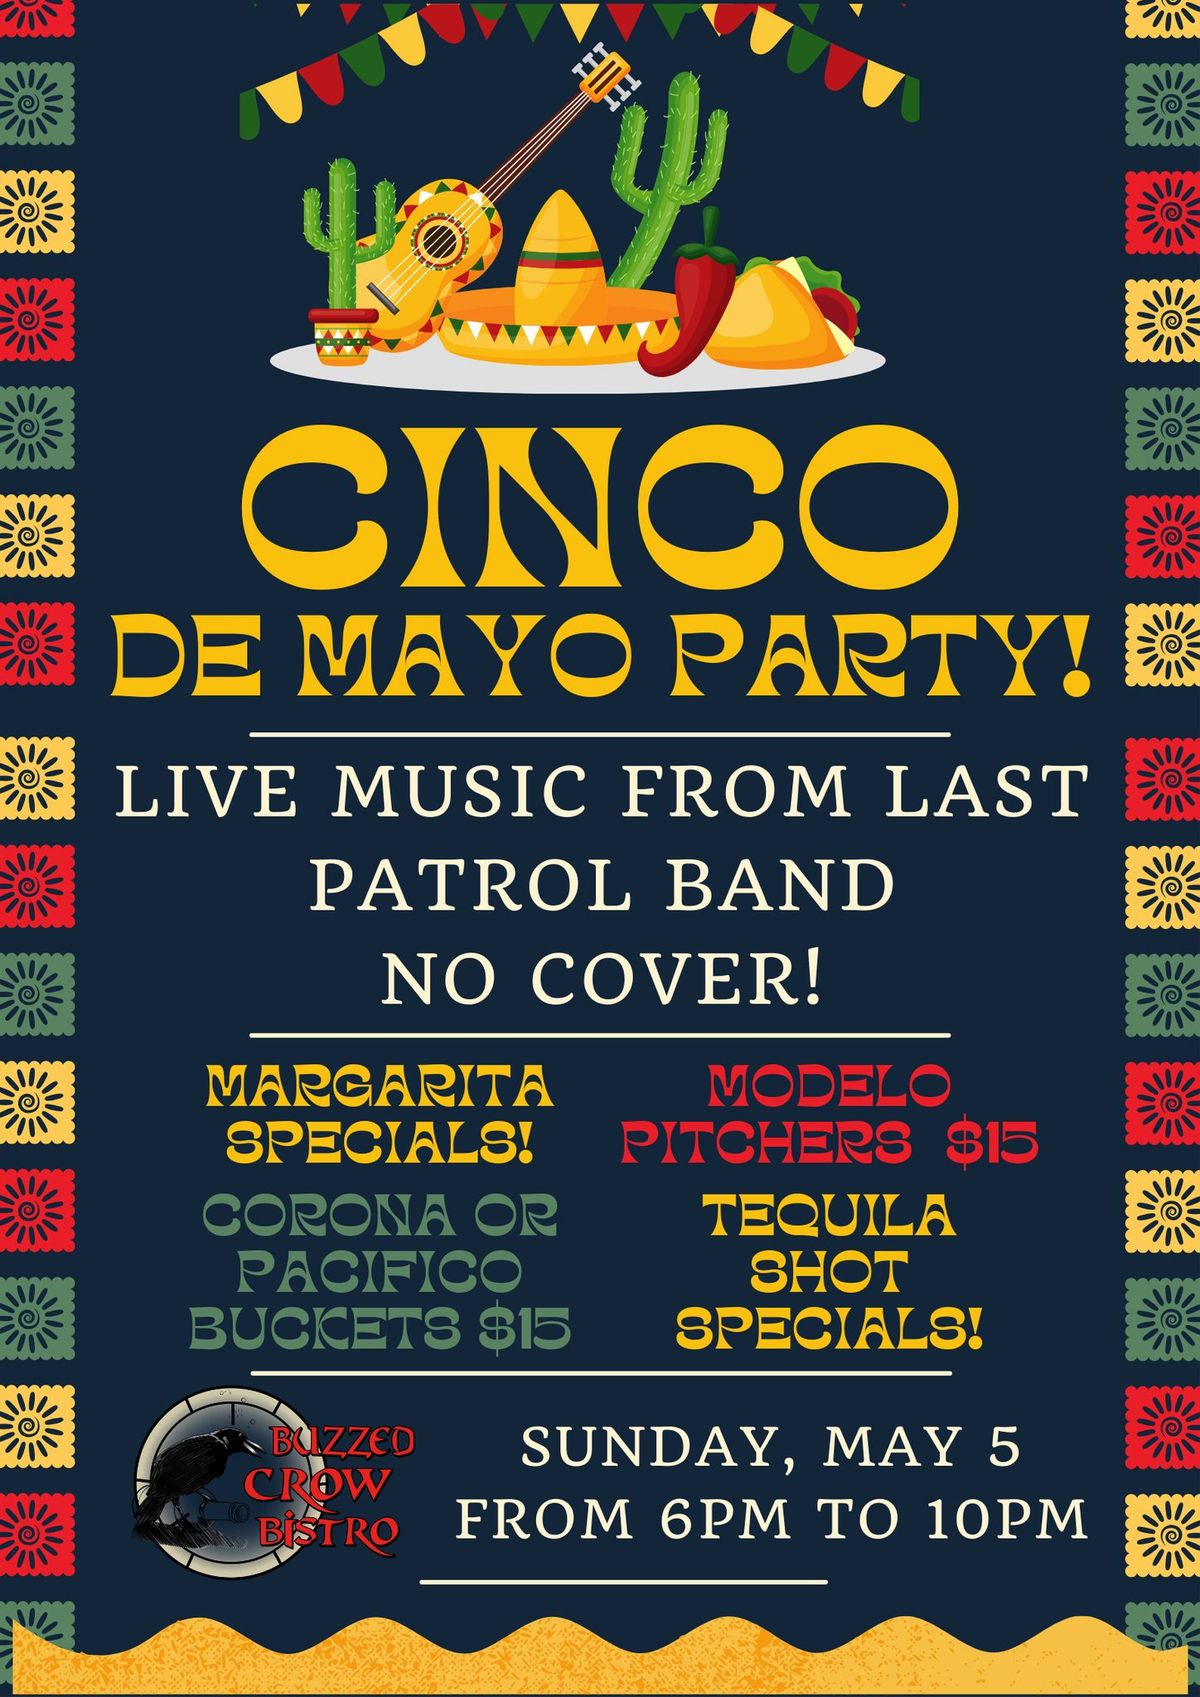 Cinco De Mayo Party!- Live Music from Last Patrol Band - No Cover!